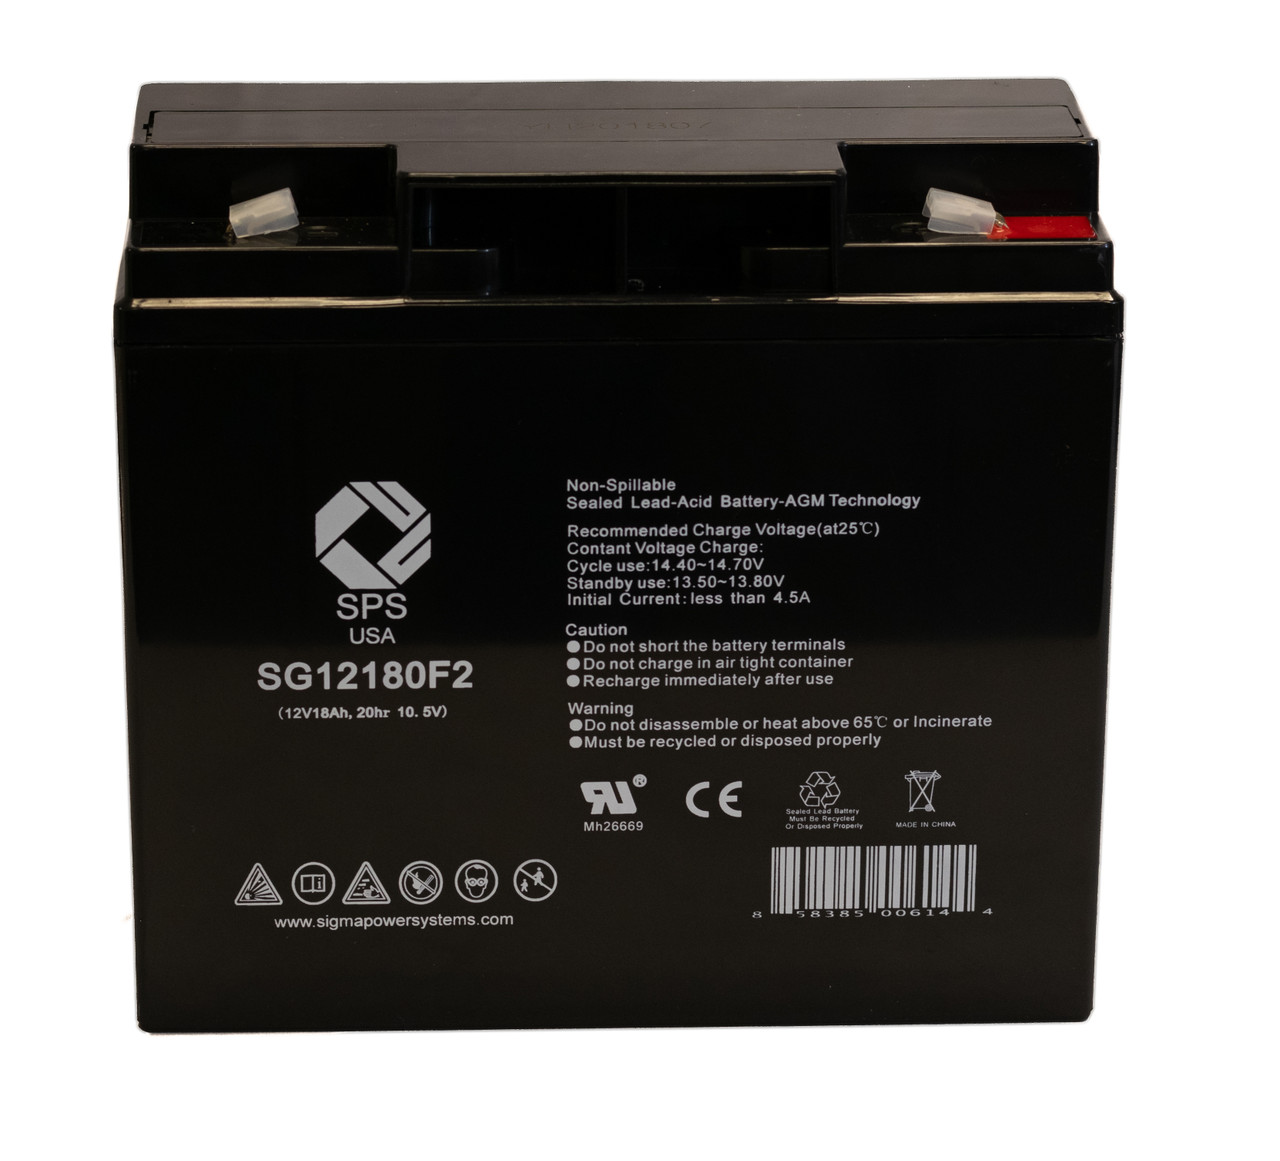 Raion Power RG12180T2 12V 18Ah Non-Spillable Battery for Mighty Max ML18-12F2